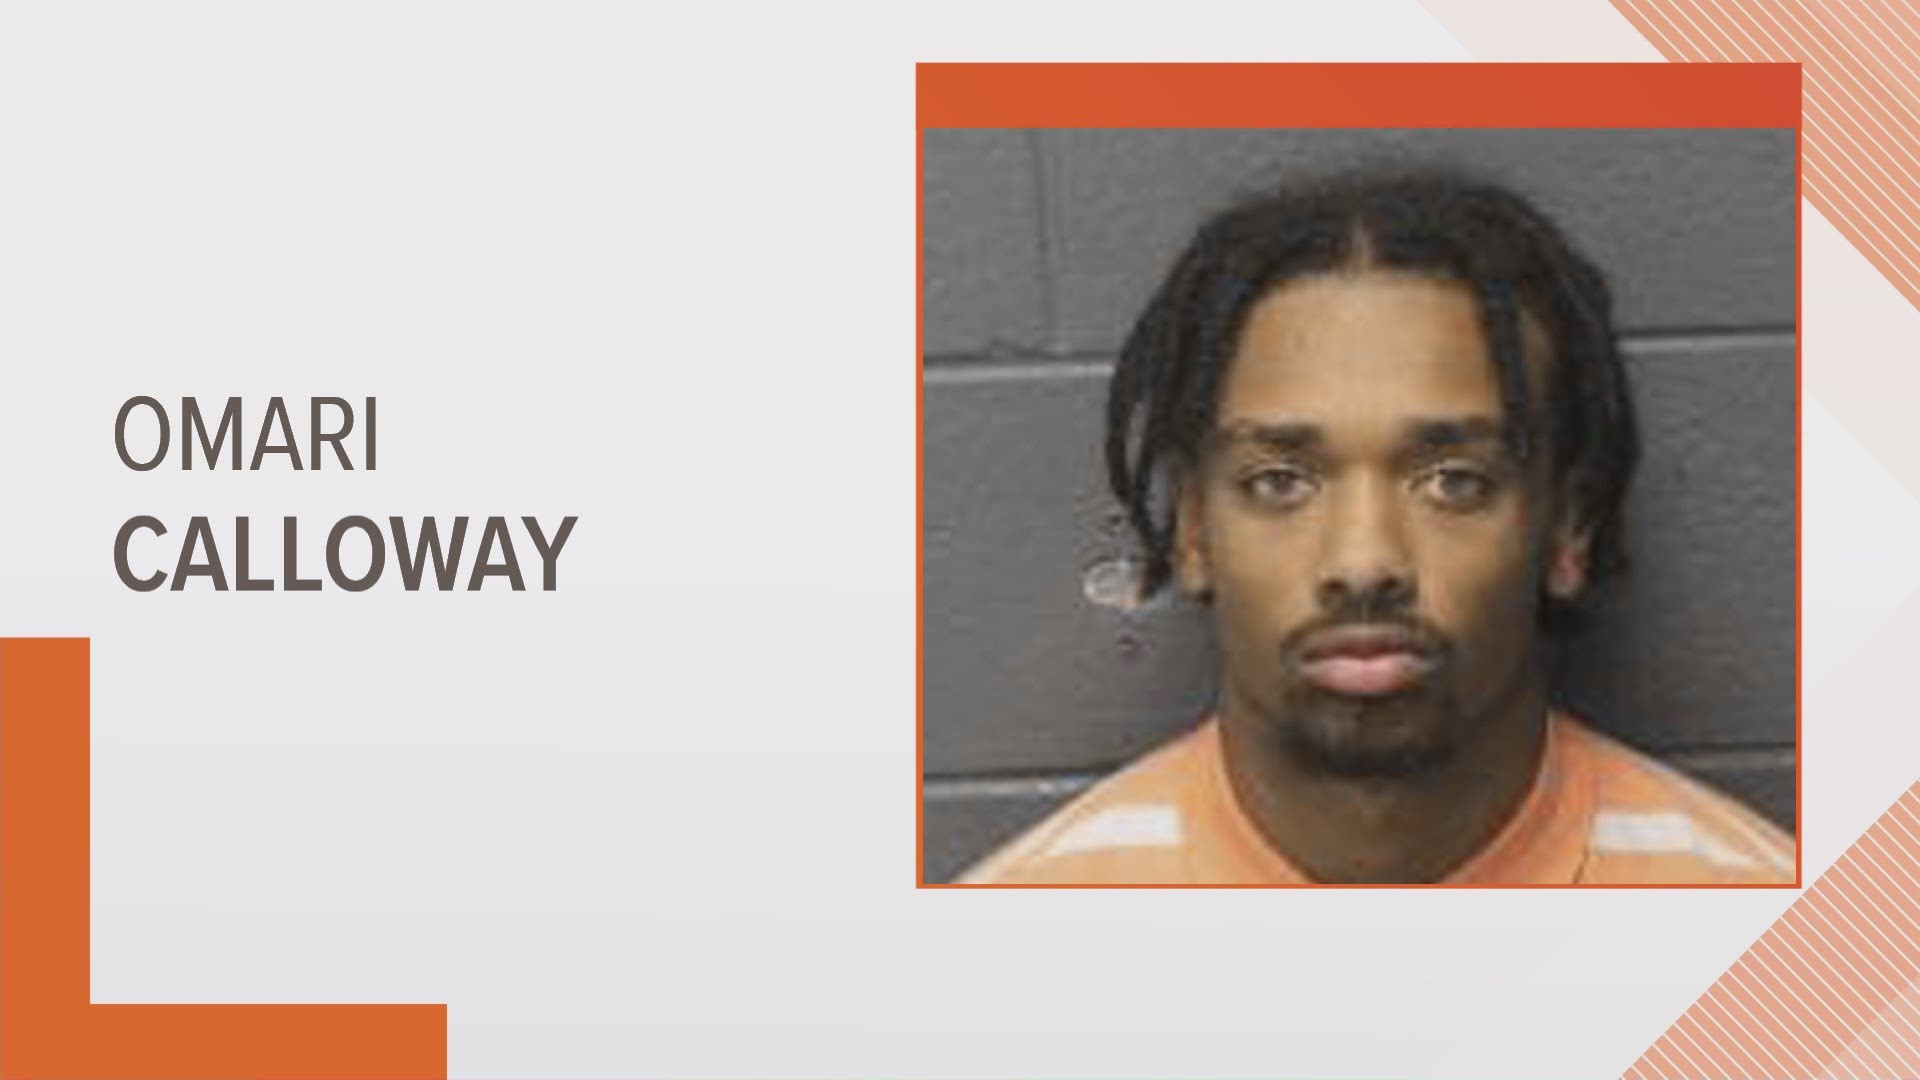 Omari Calloway was arrested and charged with manslaughter, related to the shooting death of a teenager on LeMaster Avenue Monday night.